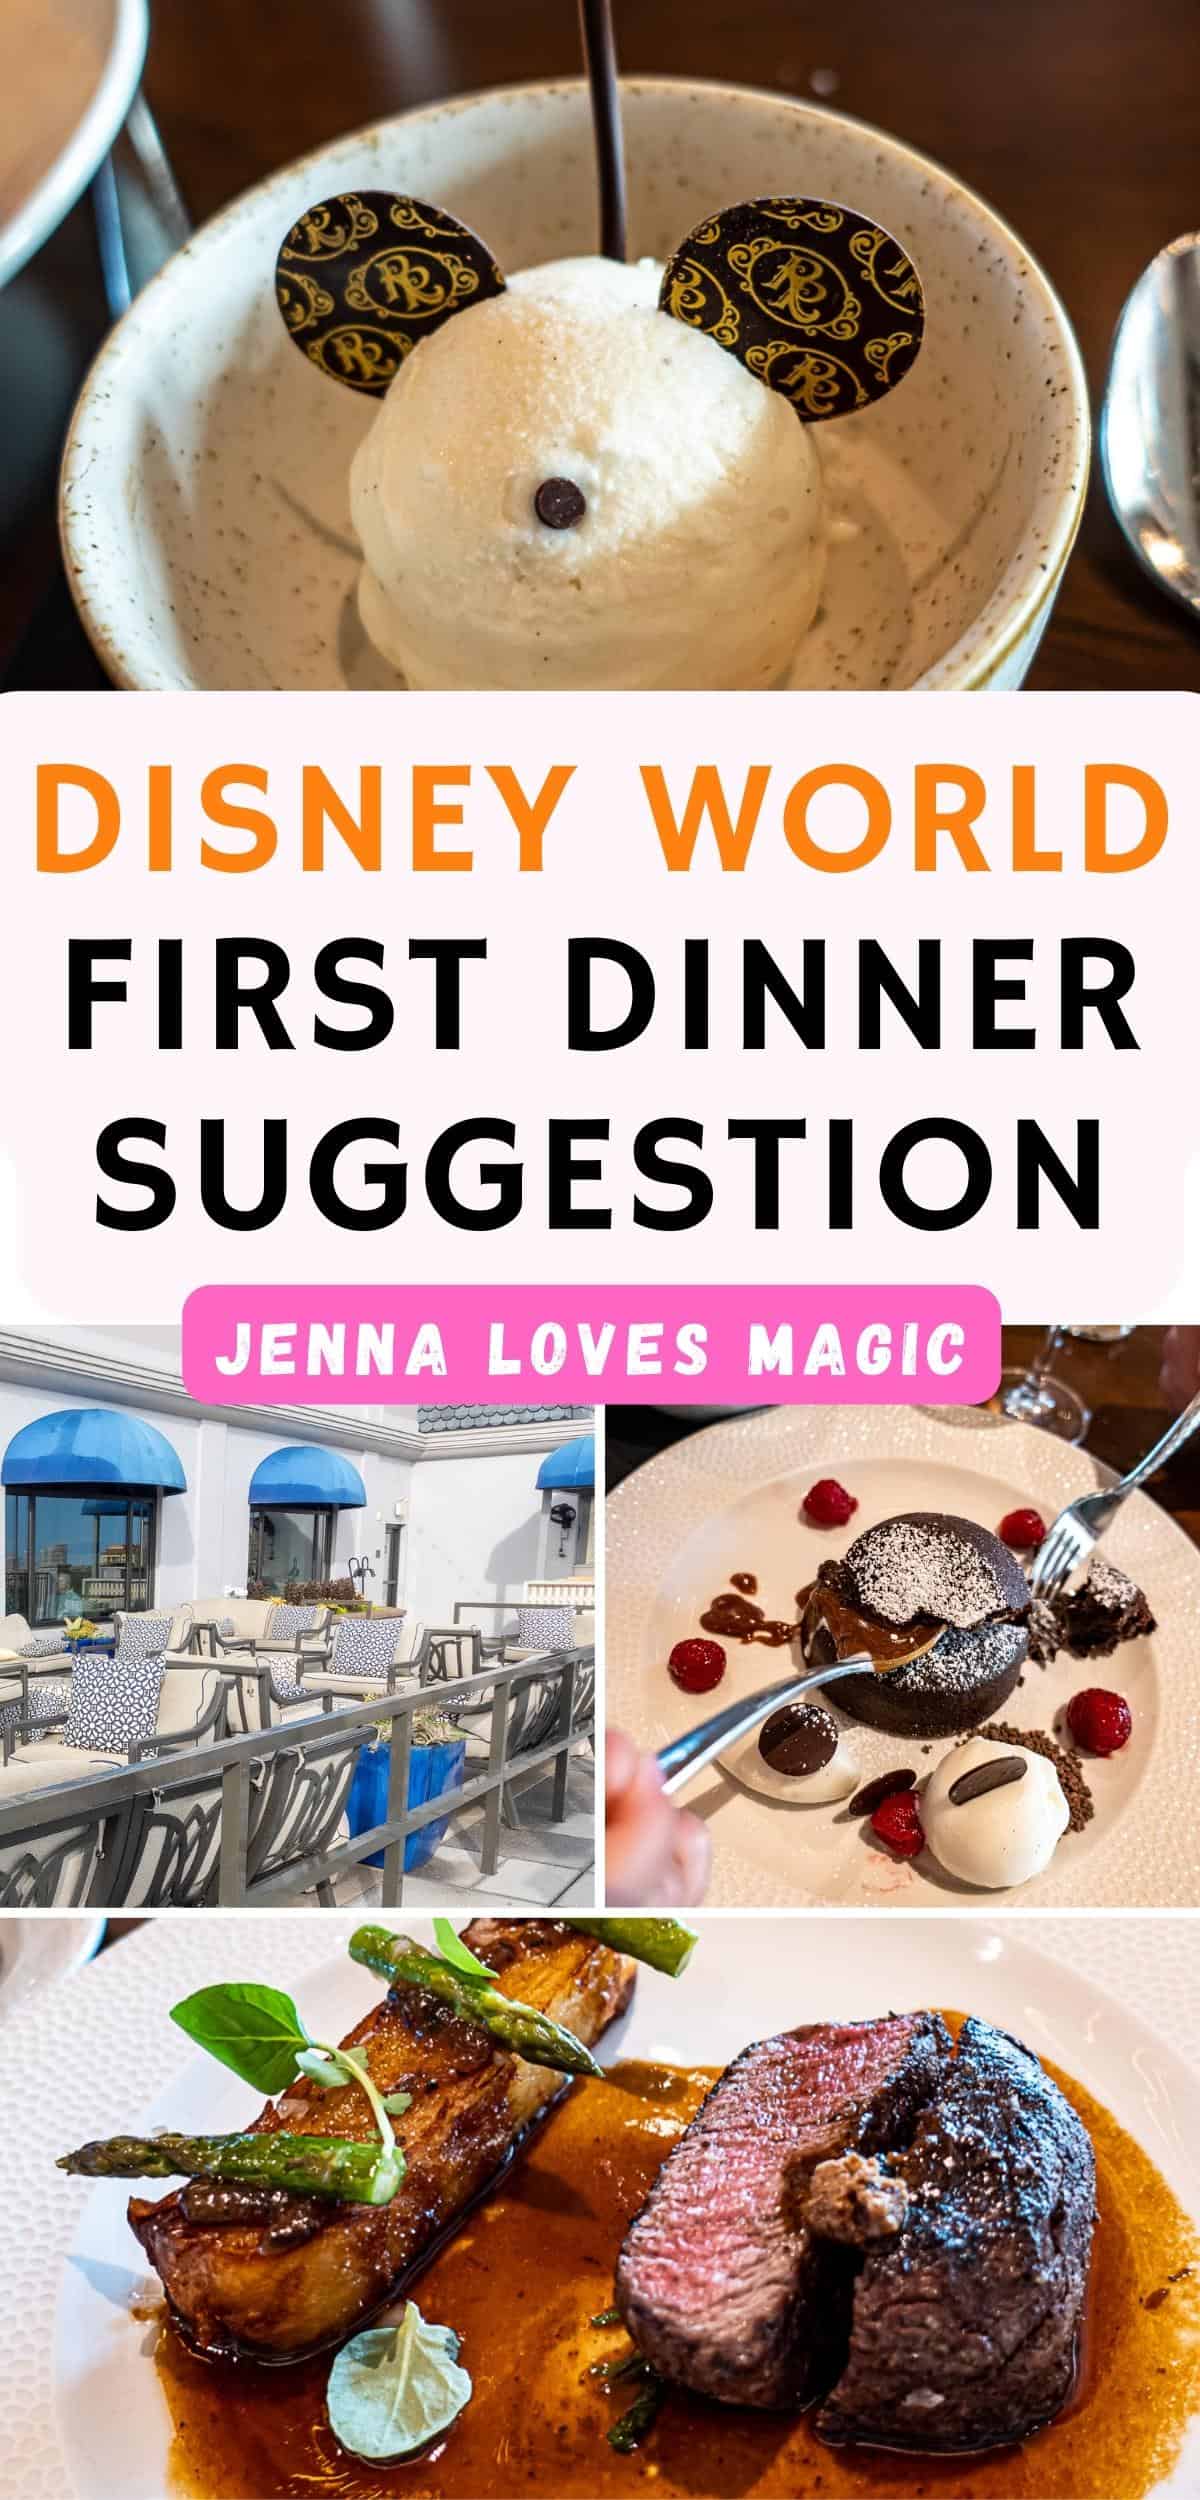 First night at Disney World dinner restaurant collage images with Jenna Loves Magic logo